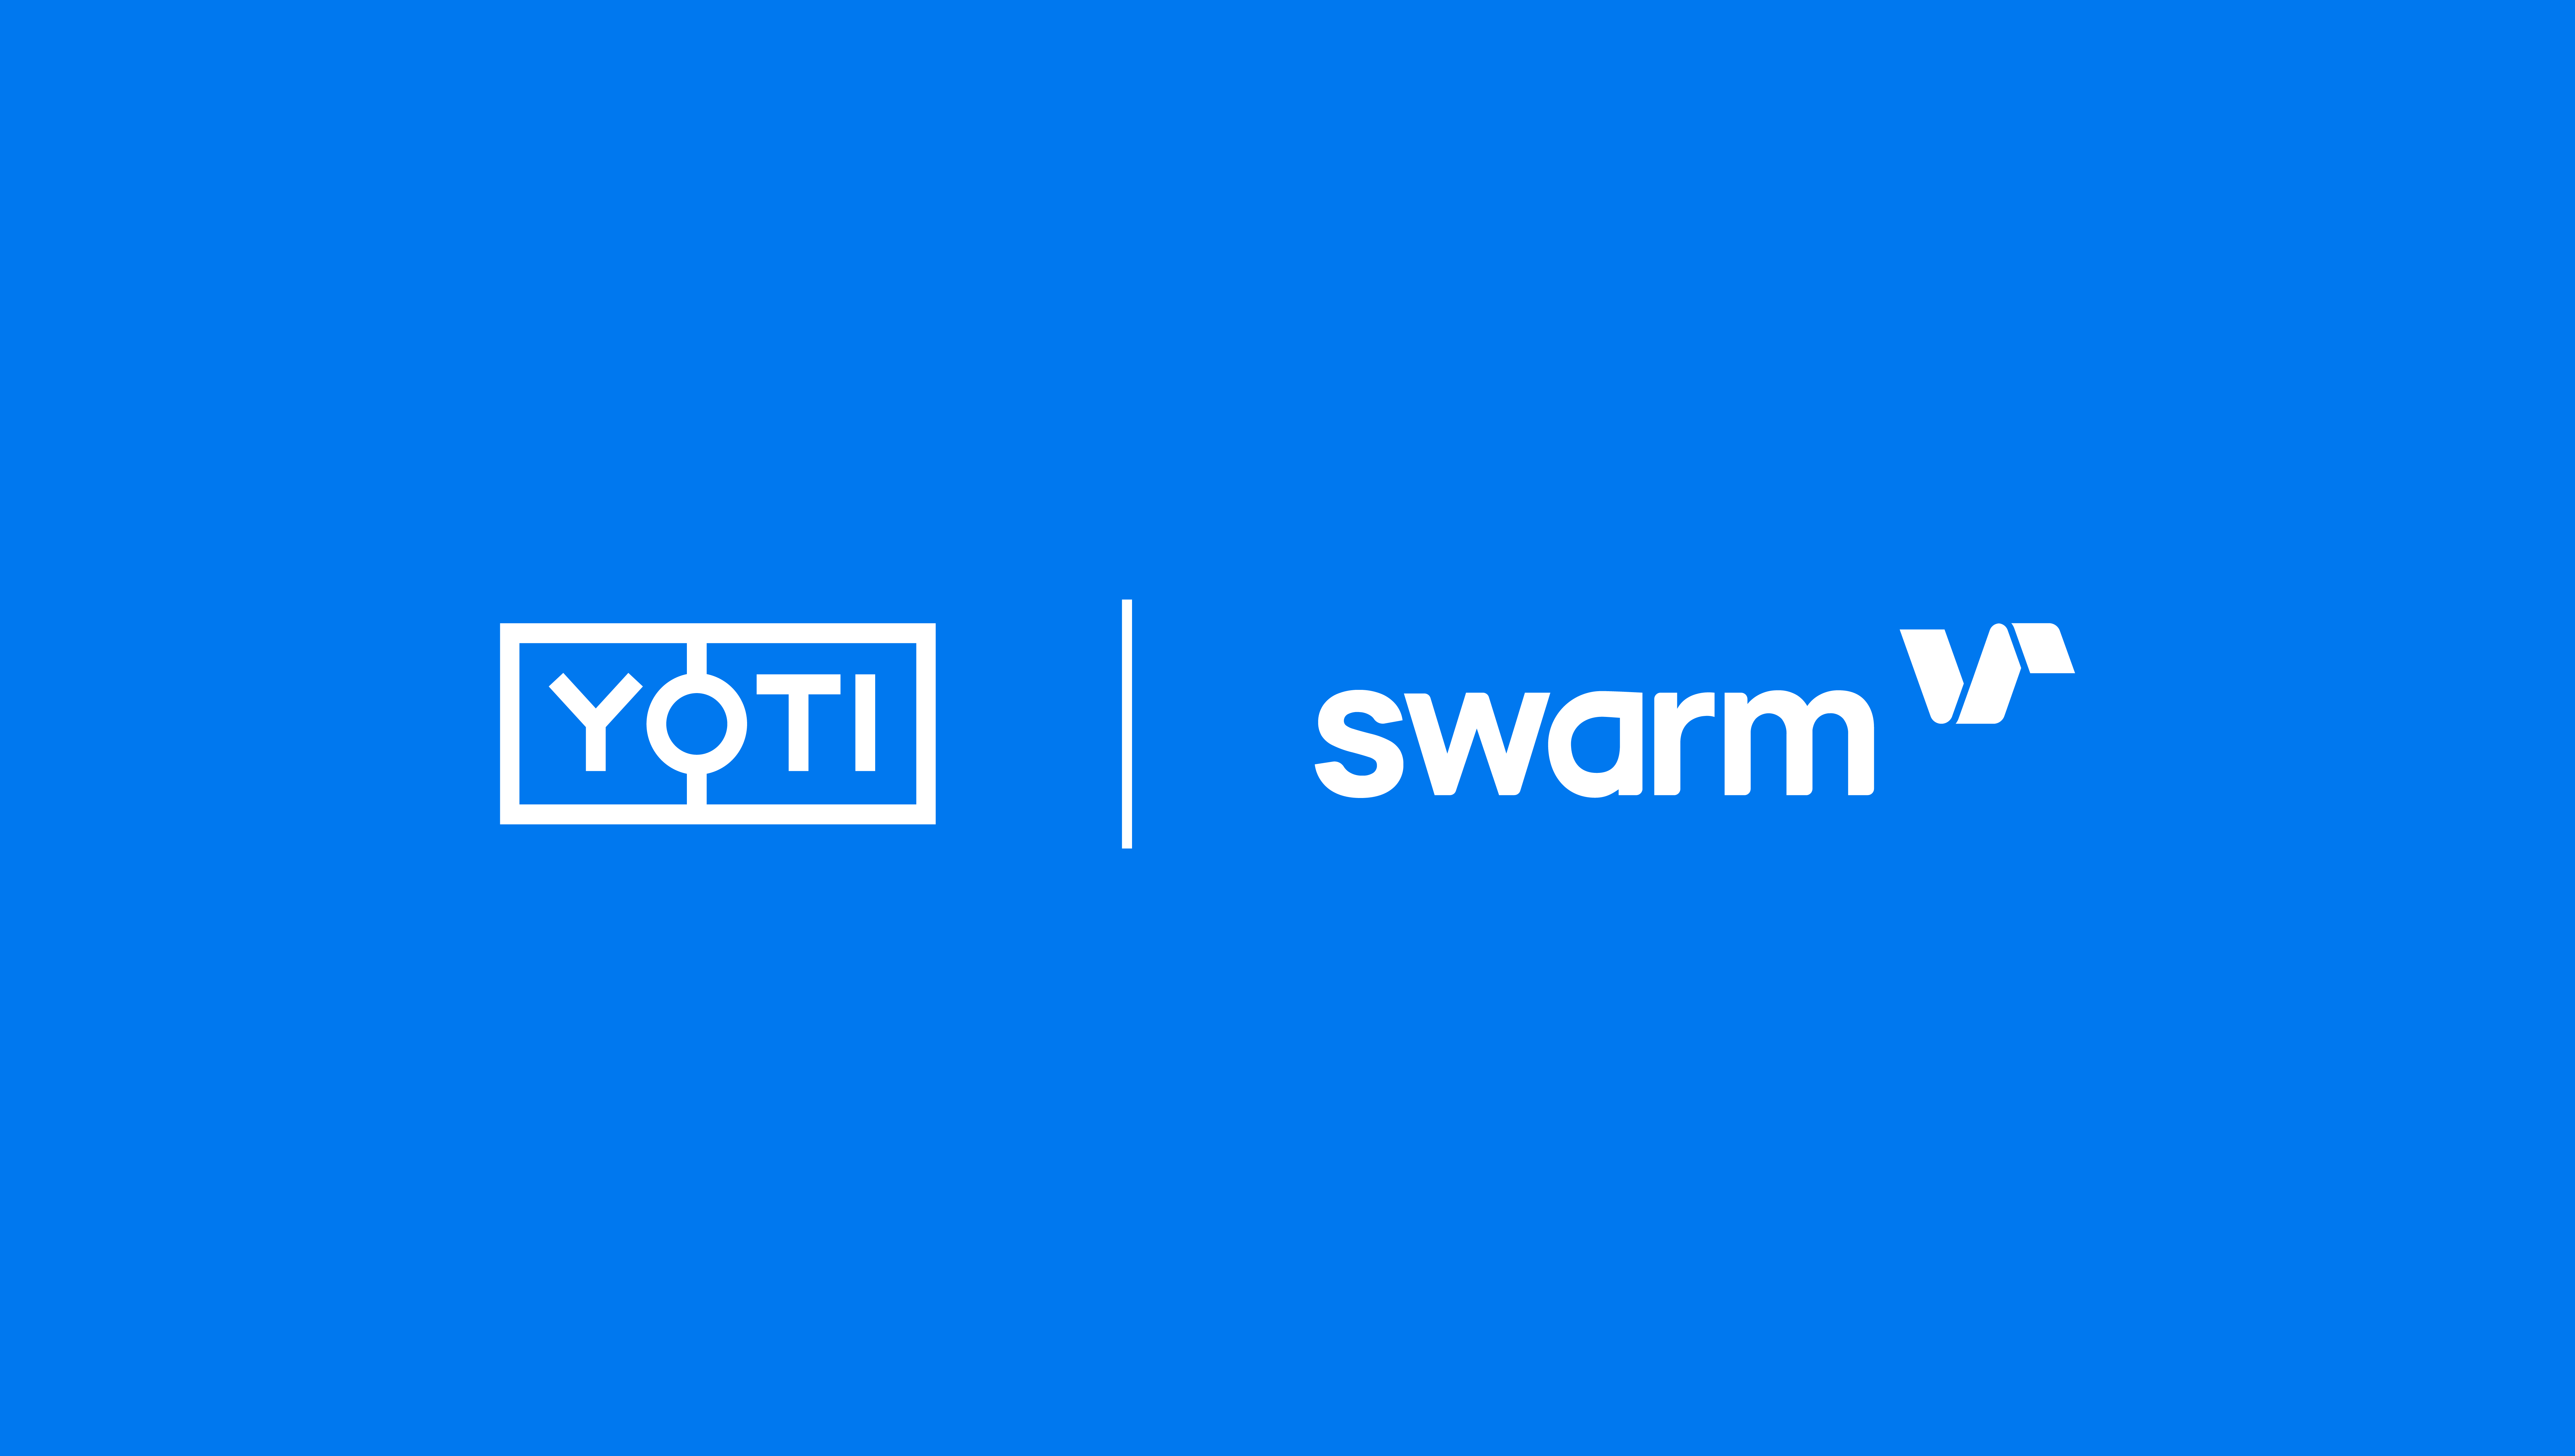 Yoti and Swarm logos presented together